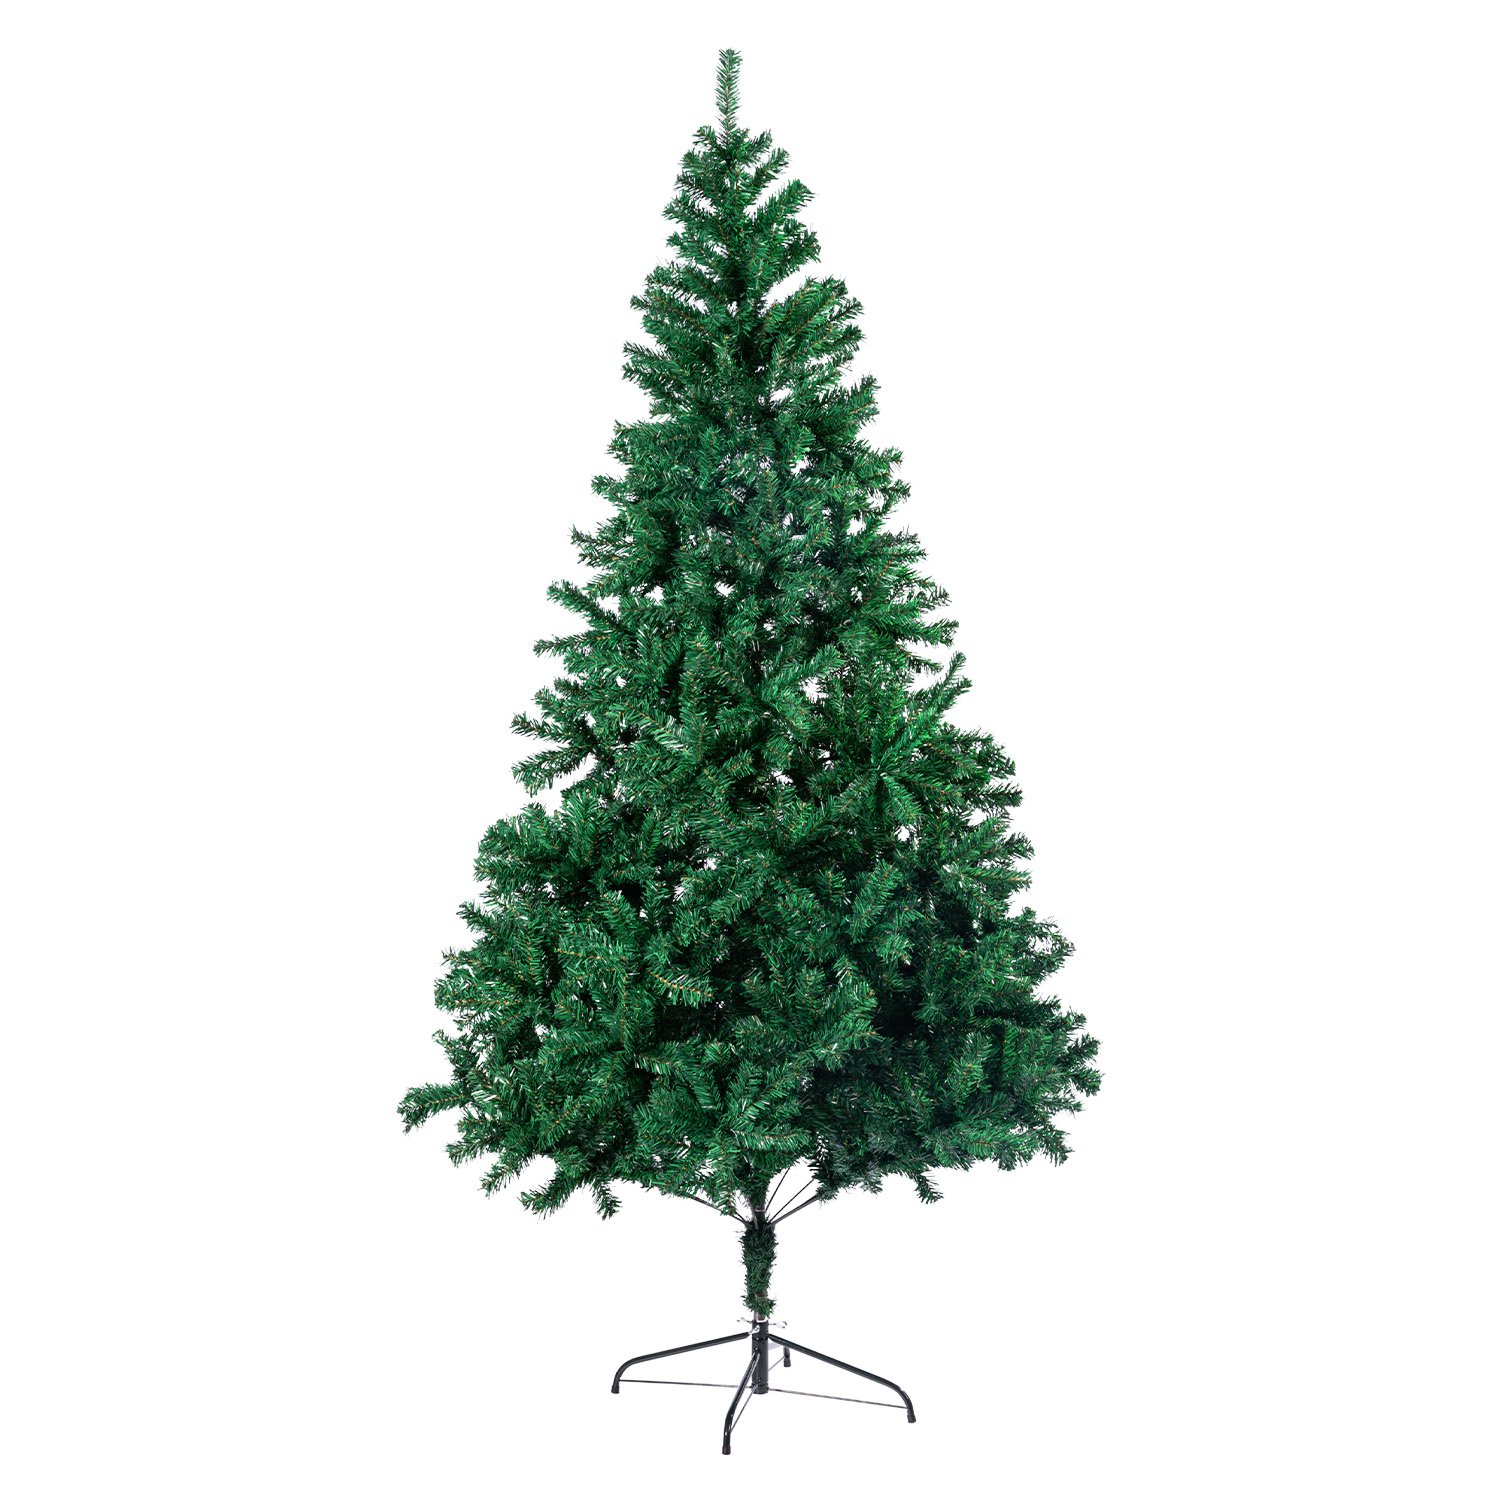 Christabelle Green Artificial Christmas Tree 2.4m - 1500 Tips 2